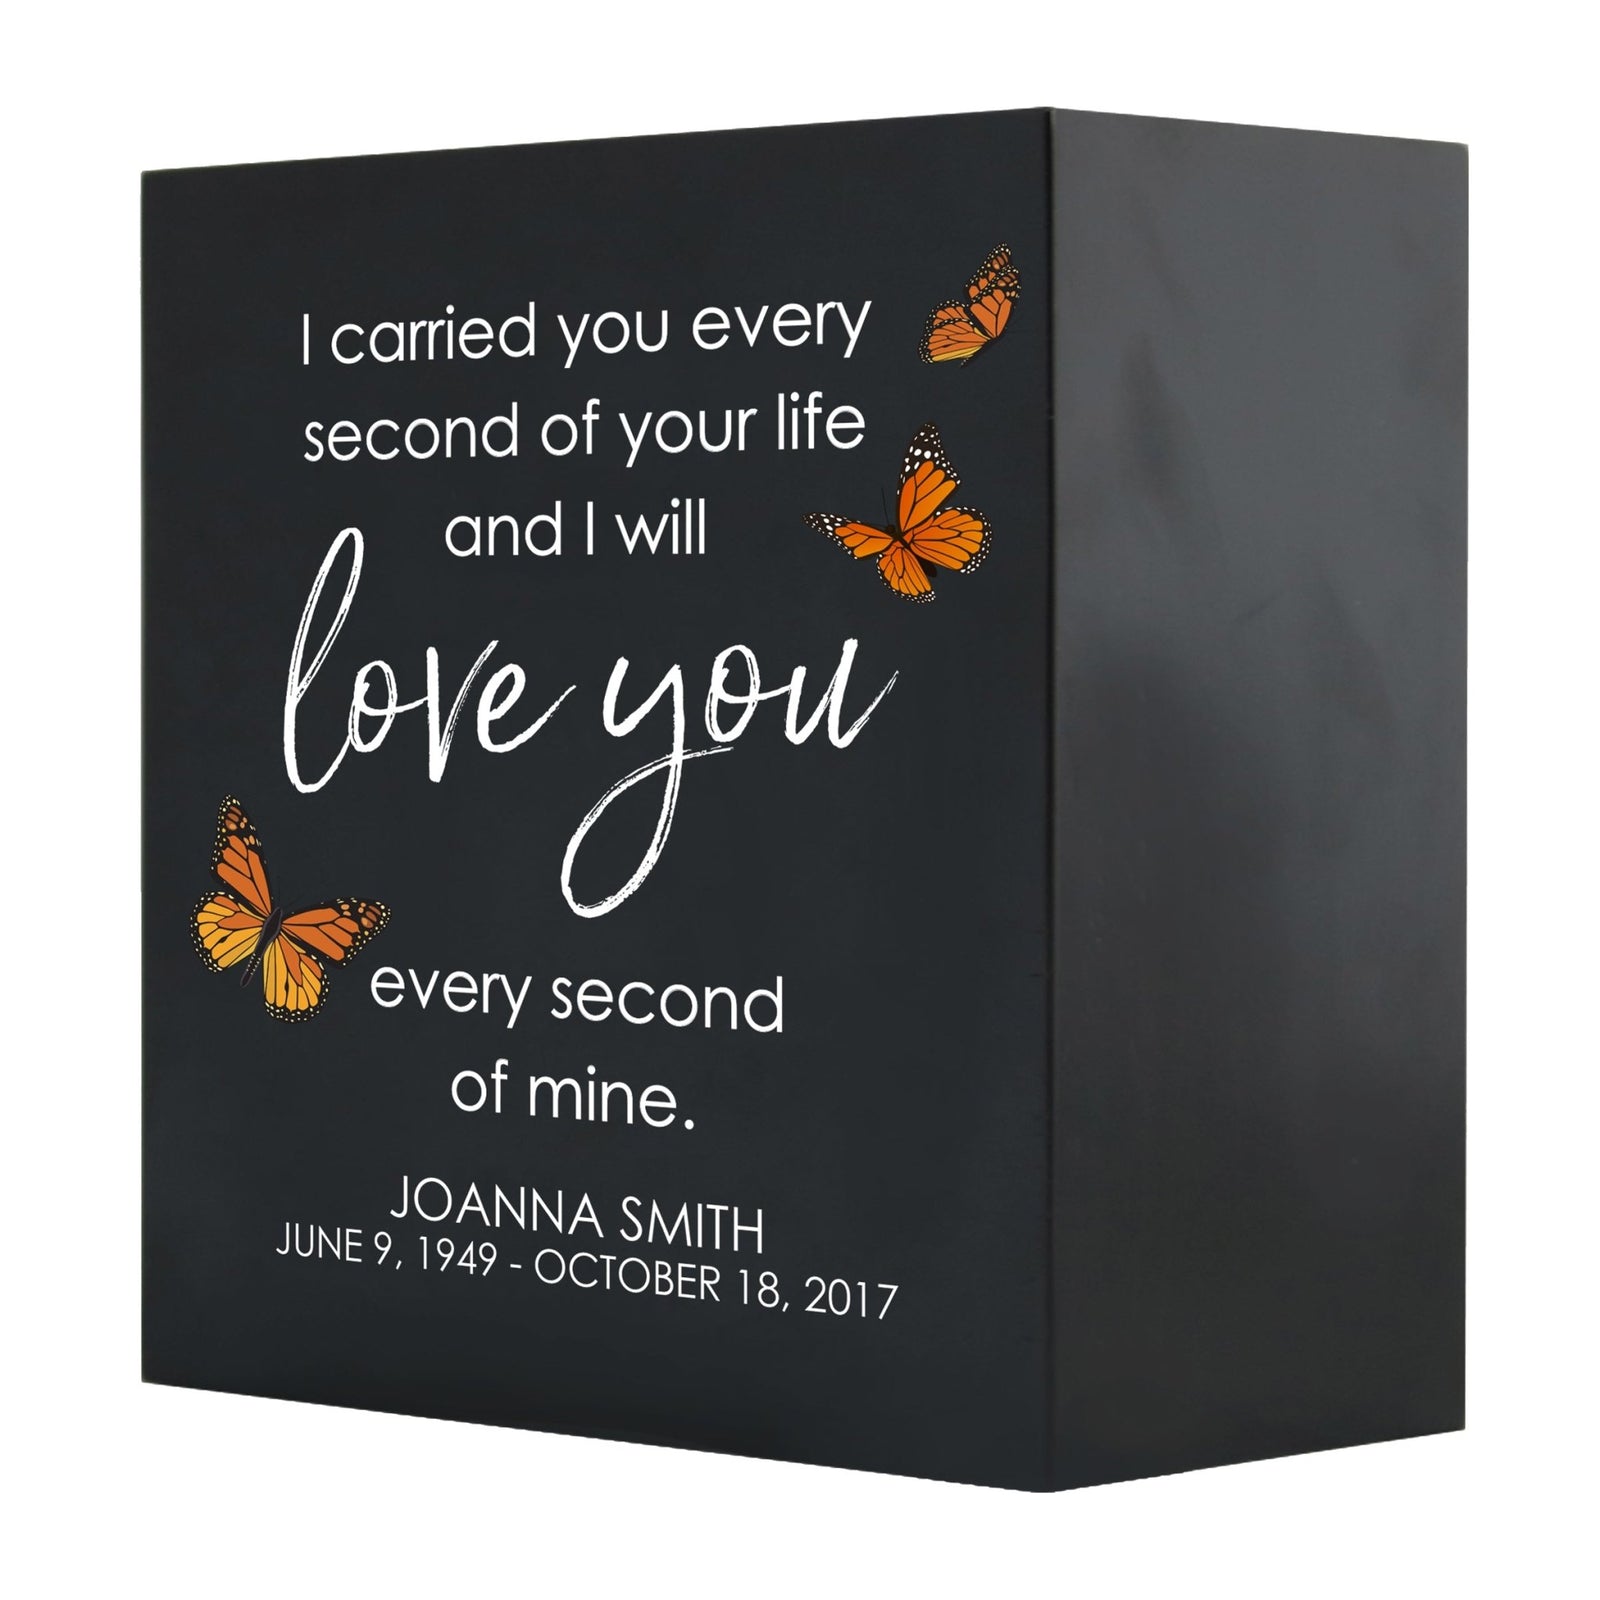 Personalized Modern Inspirational Memorial Wooden Shadow Box and Urn 6x6 holds 53 cu in of Human Ashes - I Carried You Every (Life) - LifeSong Milestones